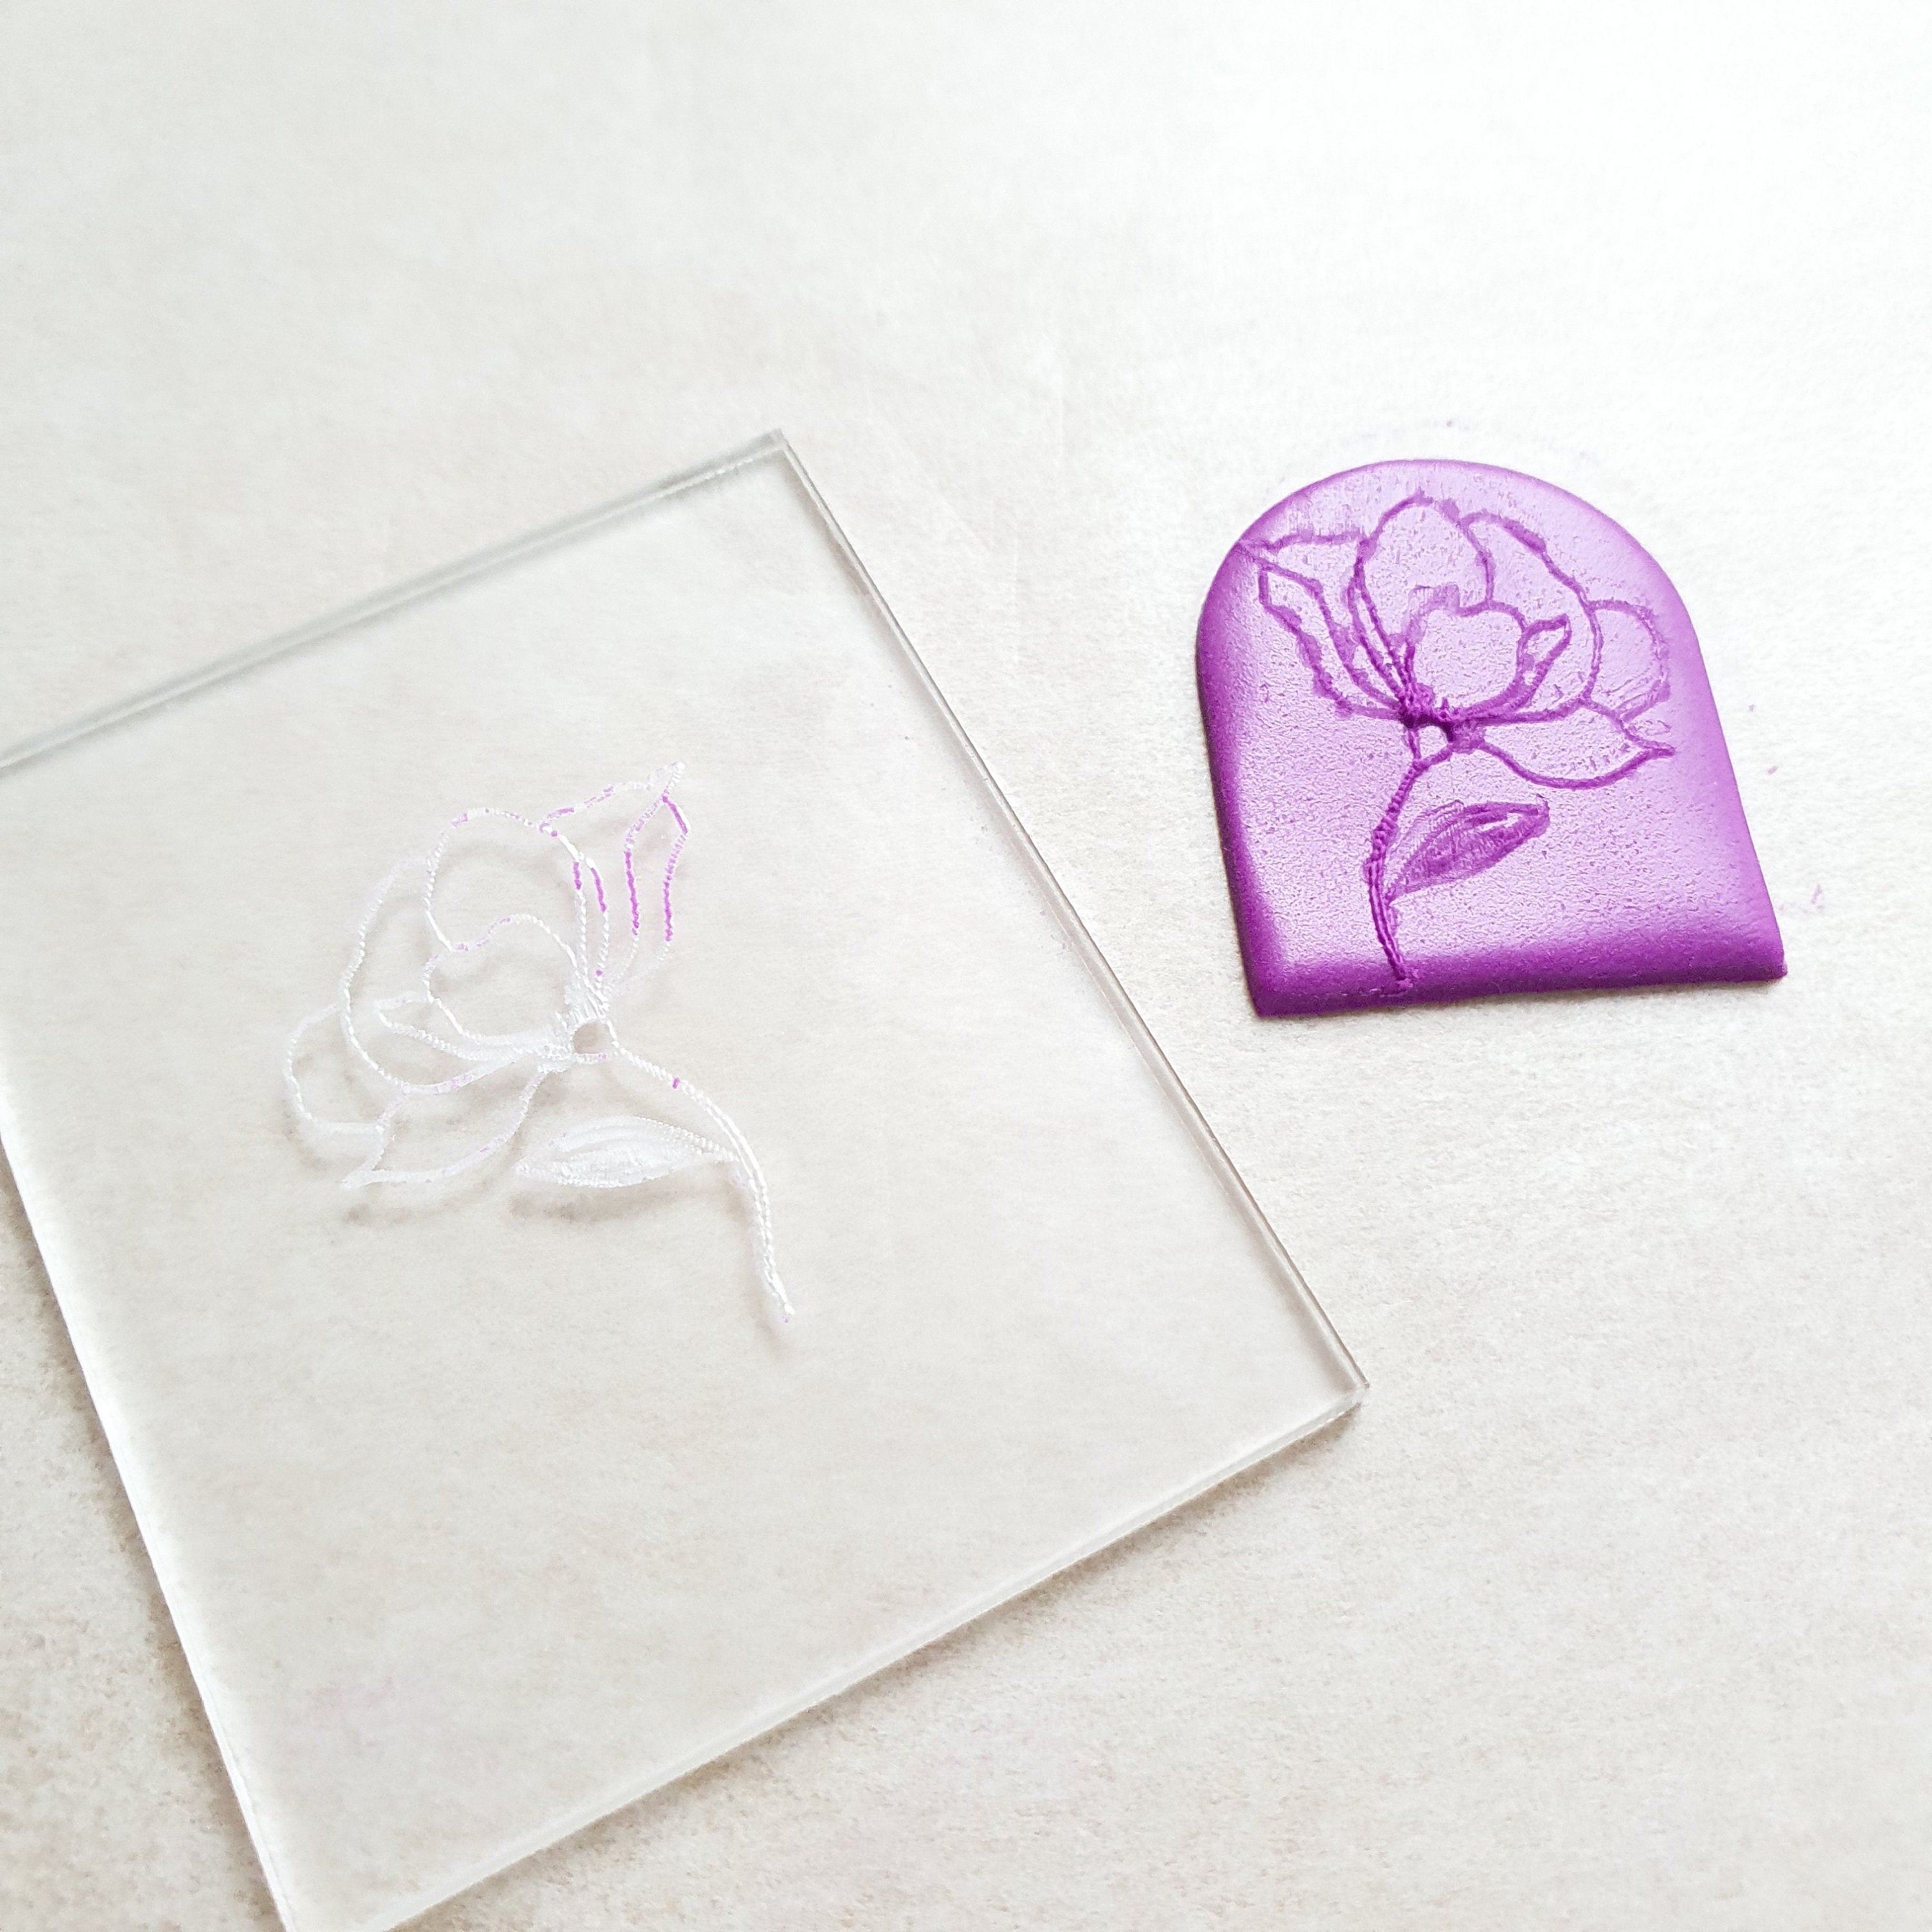 Polymer Clay Embossing Stamps  Floral Texture Stamp Clay - Flower